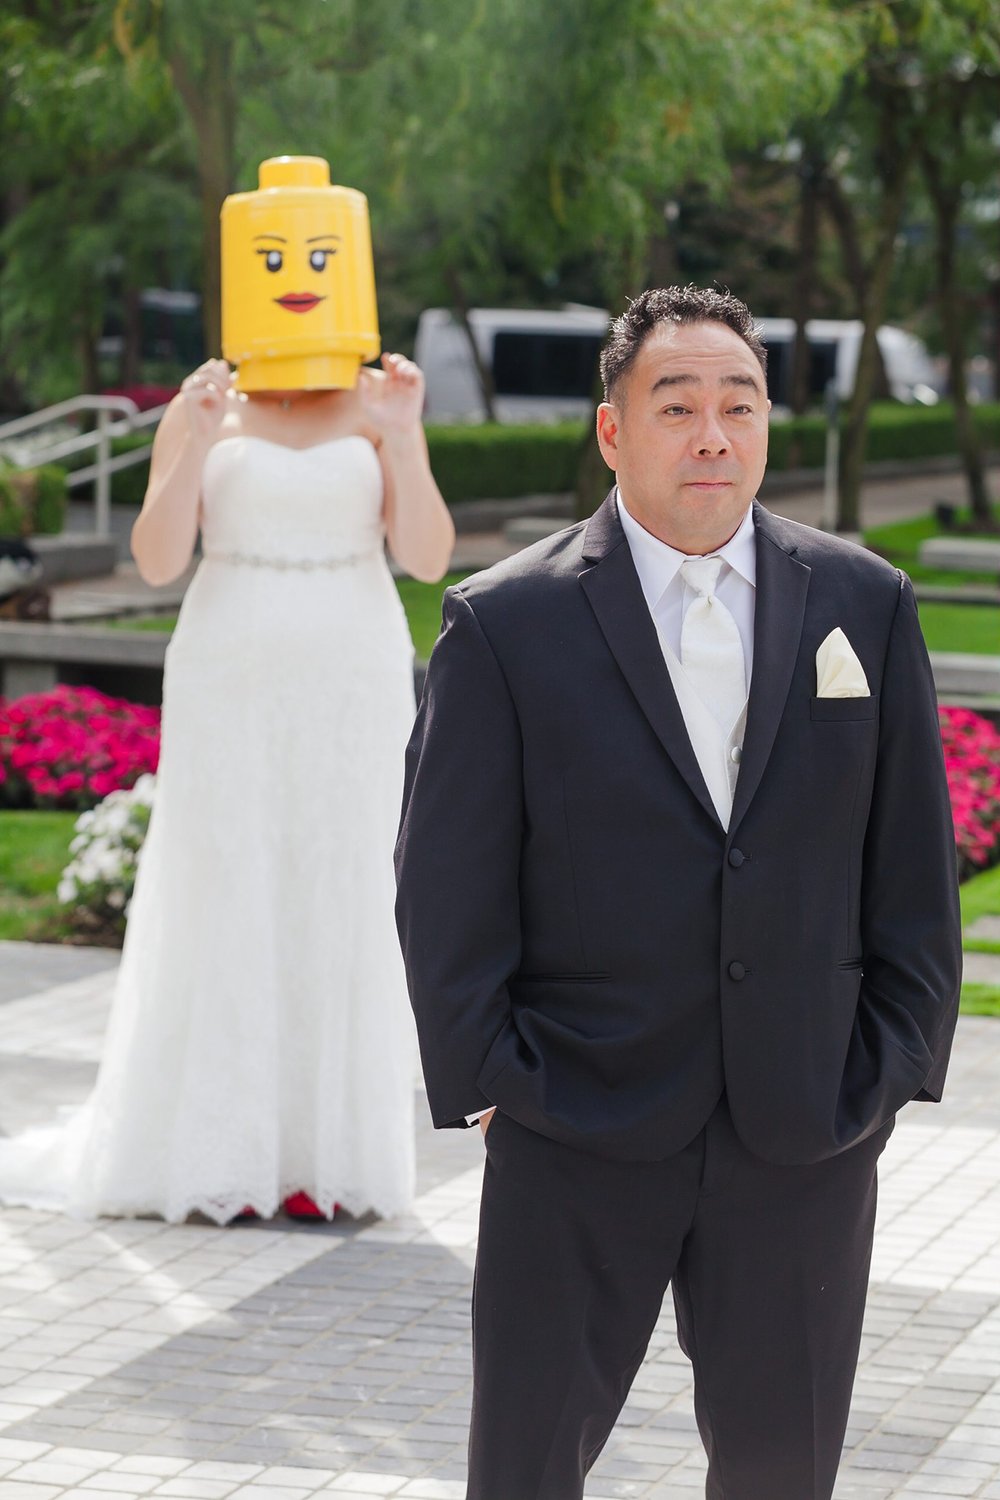 bride surprises groom with a custom lego head during first look